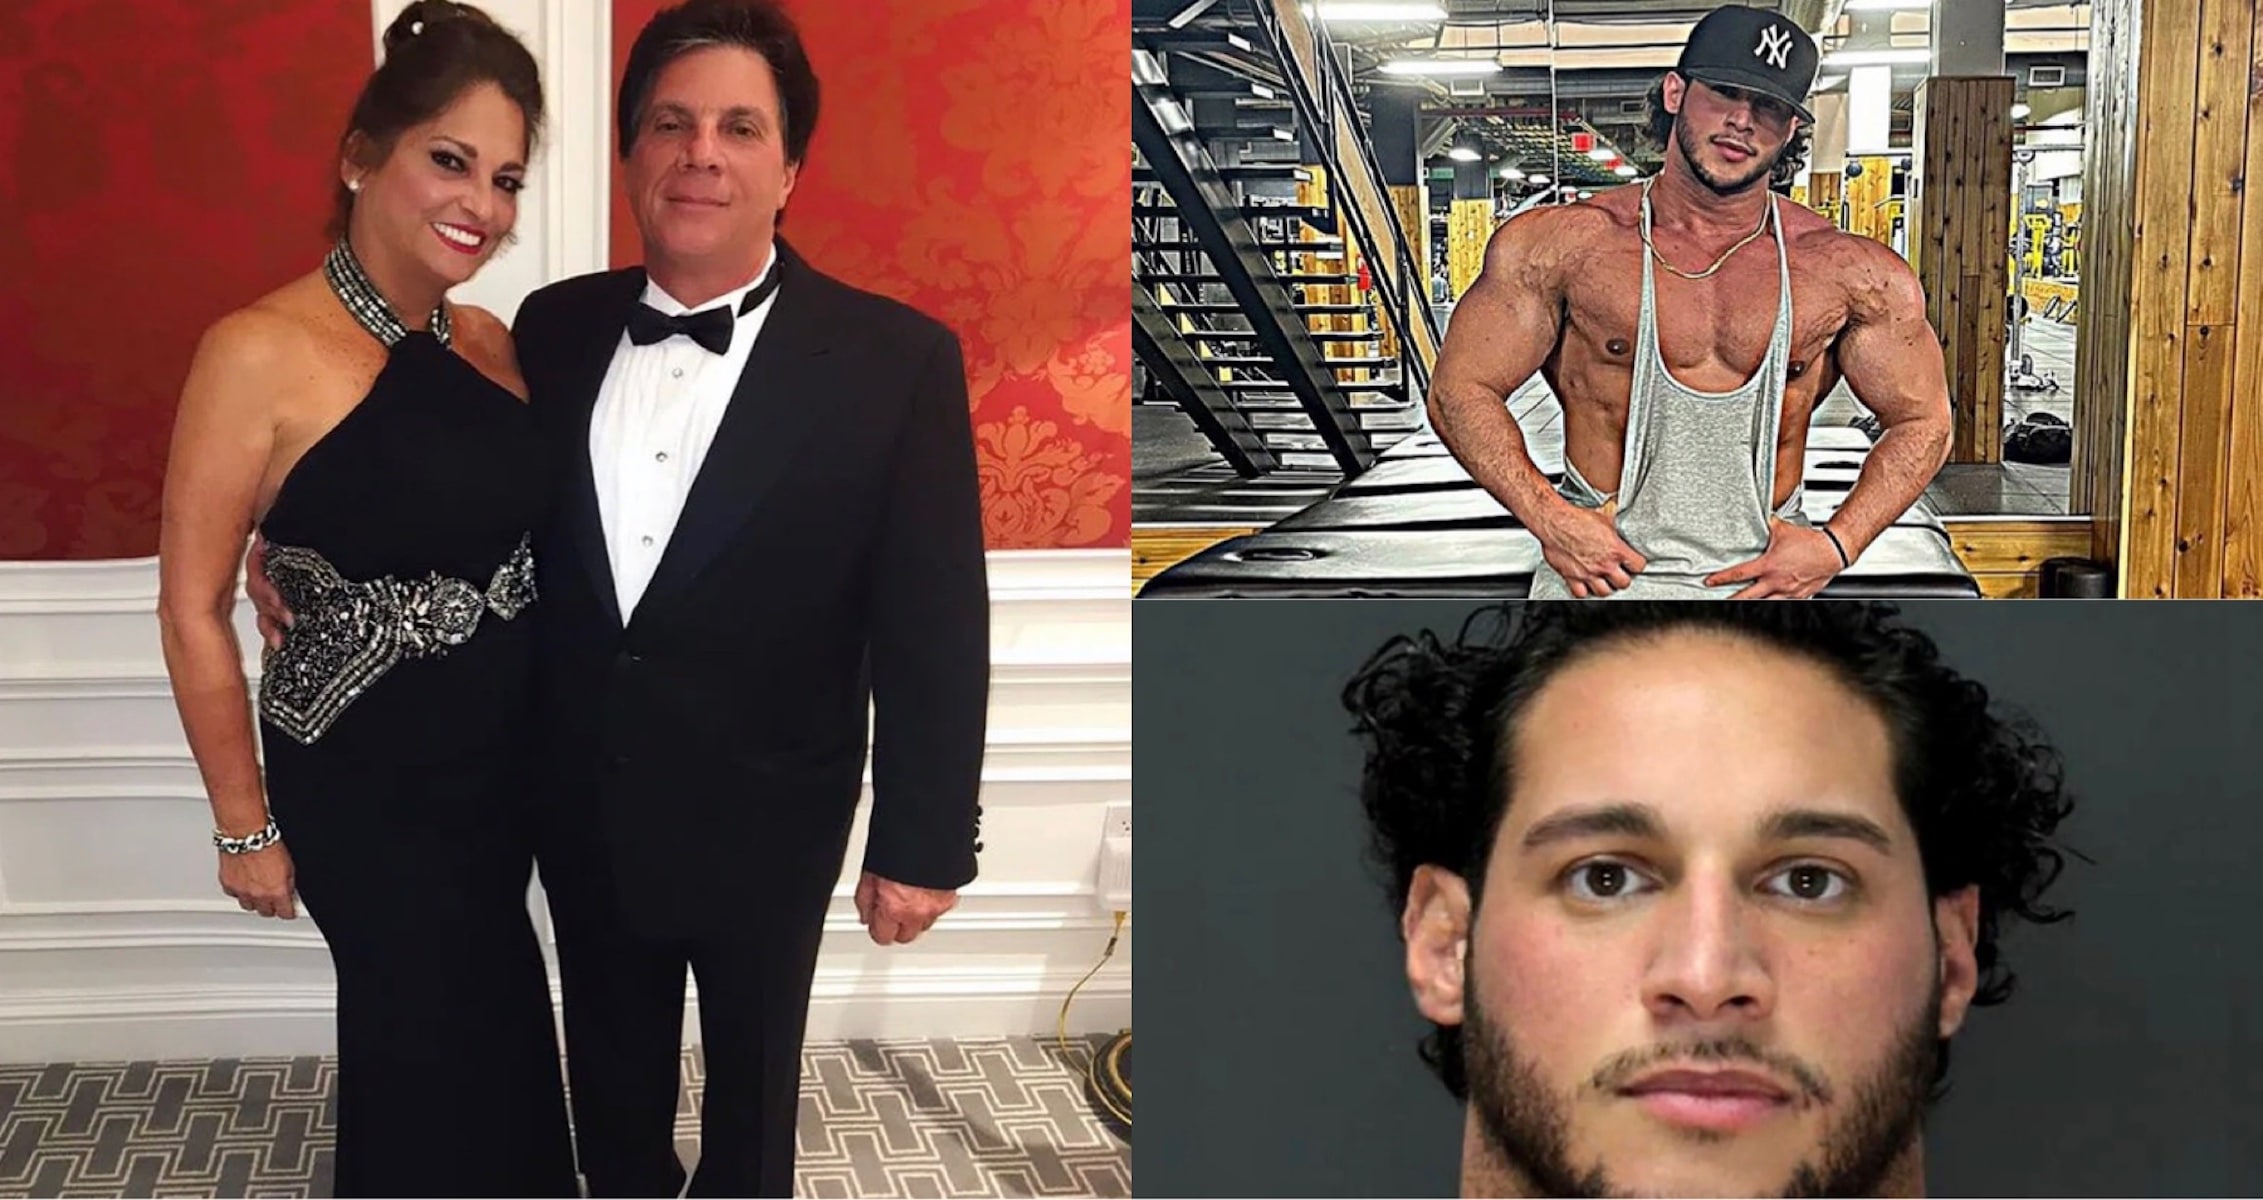 Bodybuilder accused of shooting parents at Long Island mansion